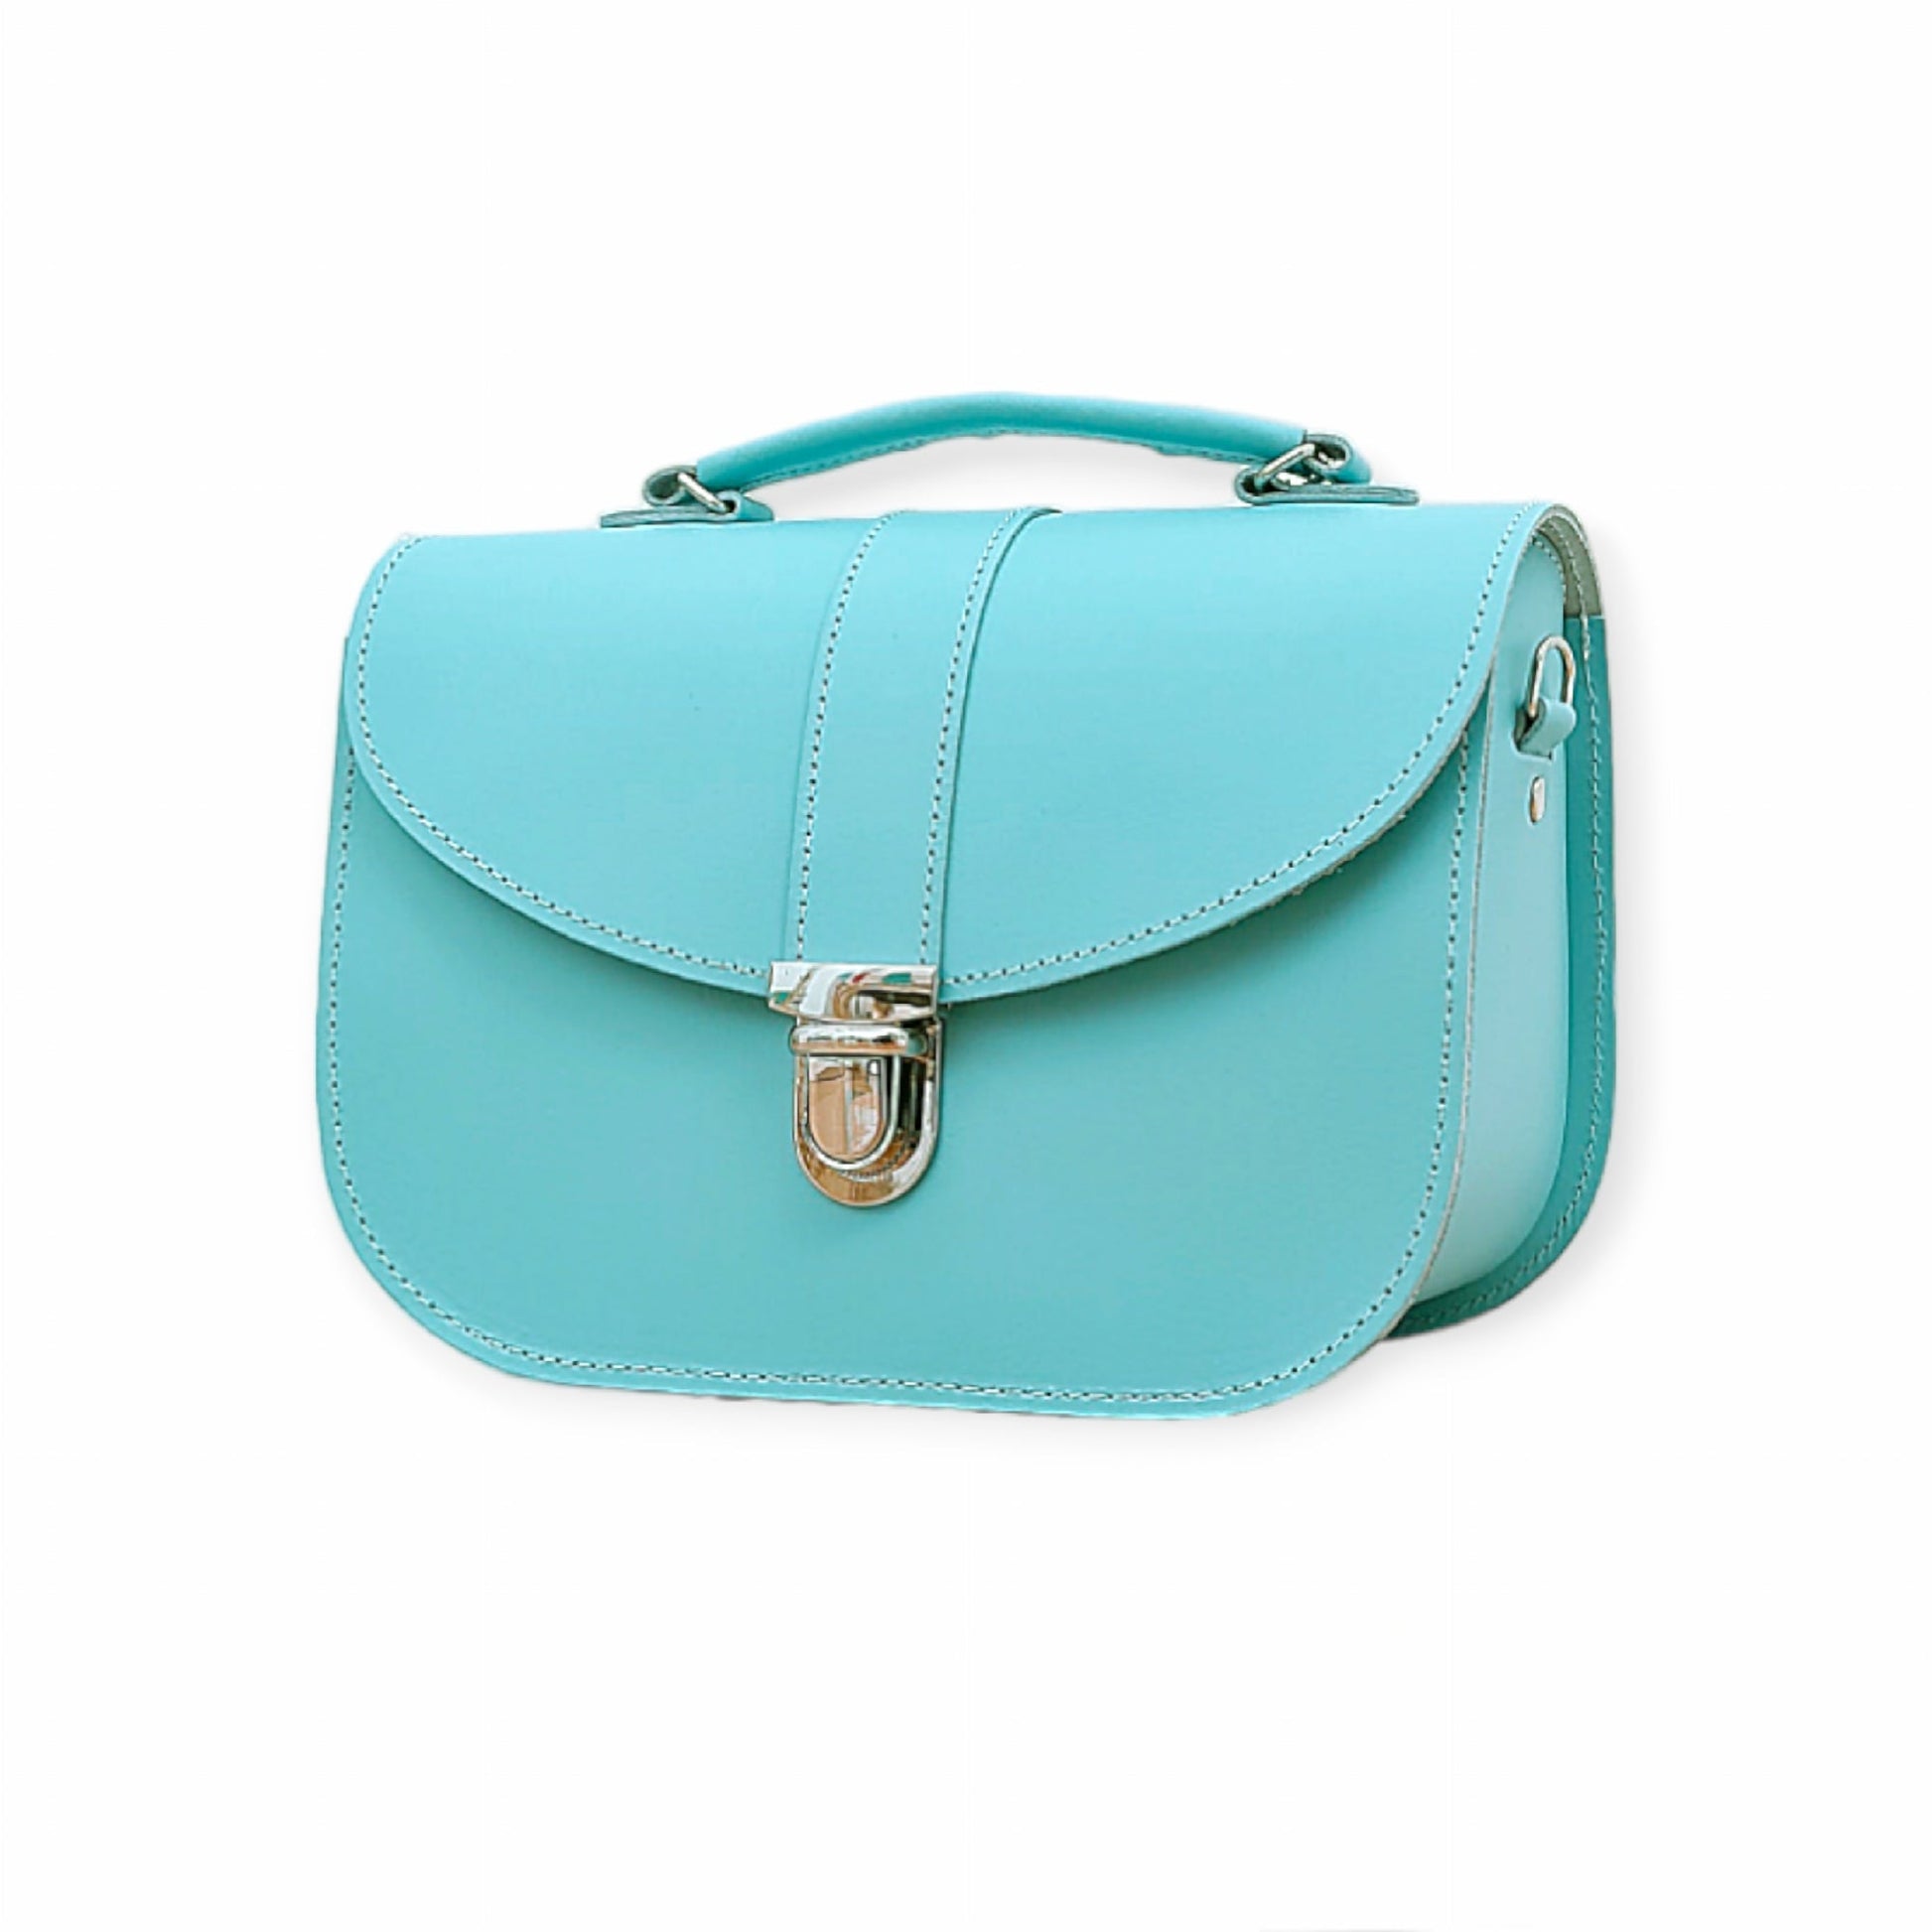 Olympia Handmade Leather Bag - Limpet - Shell Blue-1